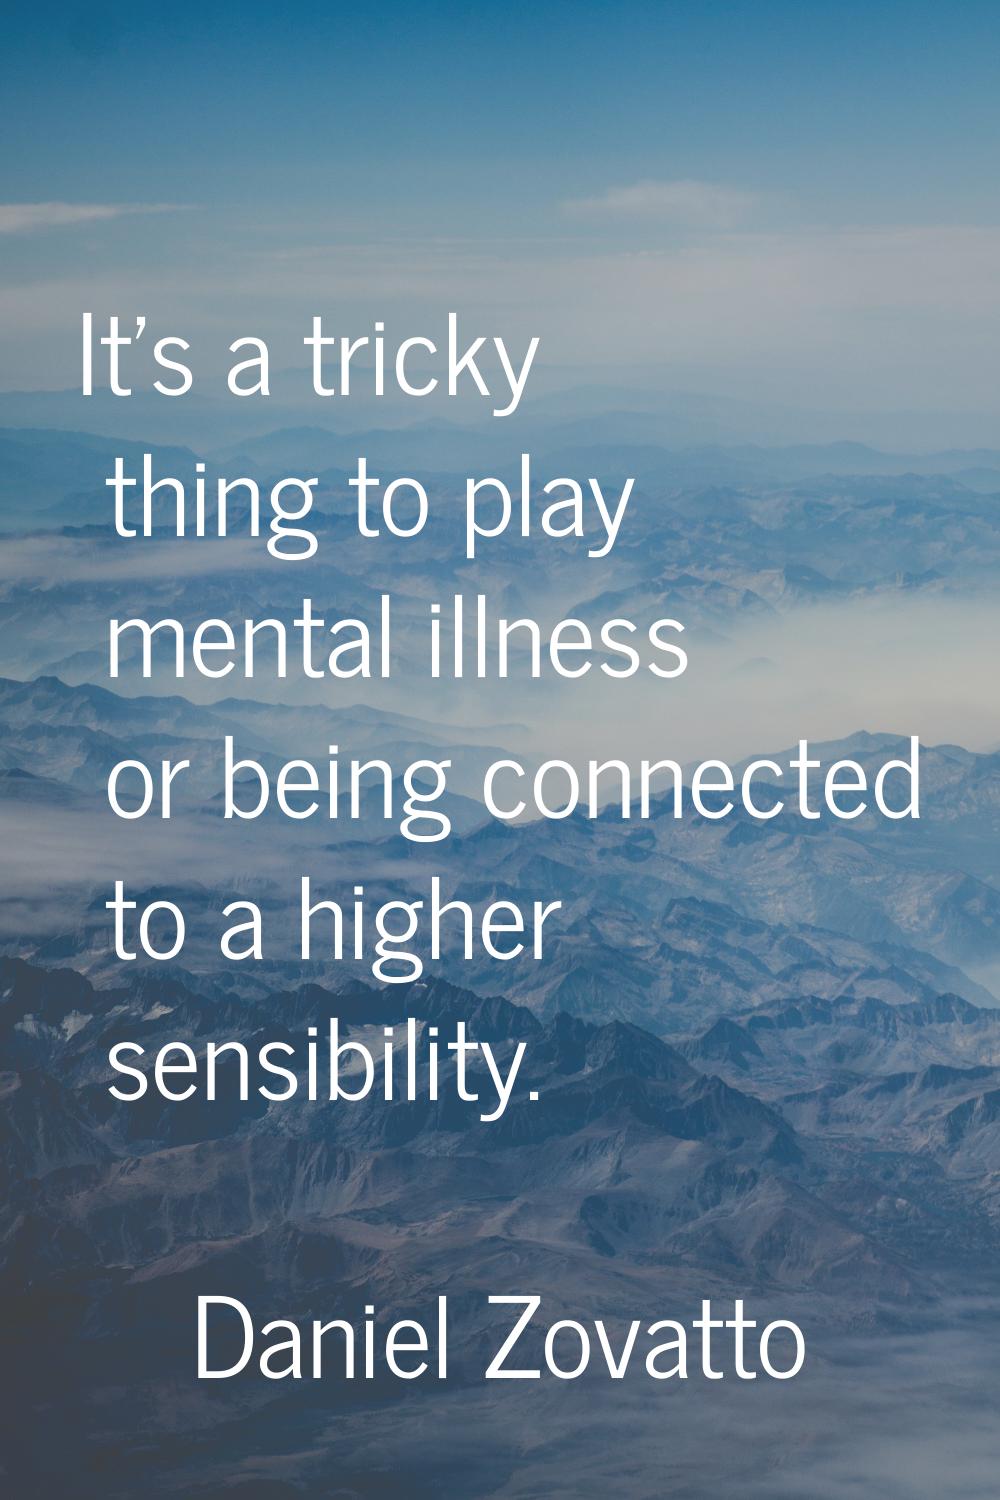 It's a tricky thing to play mental illness or being connected to a higher sensibility.